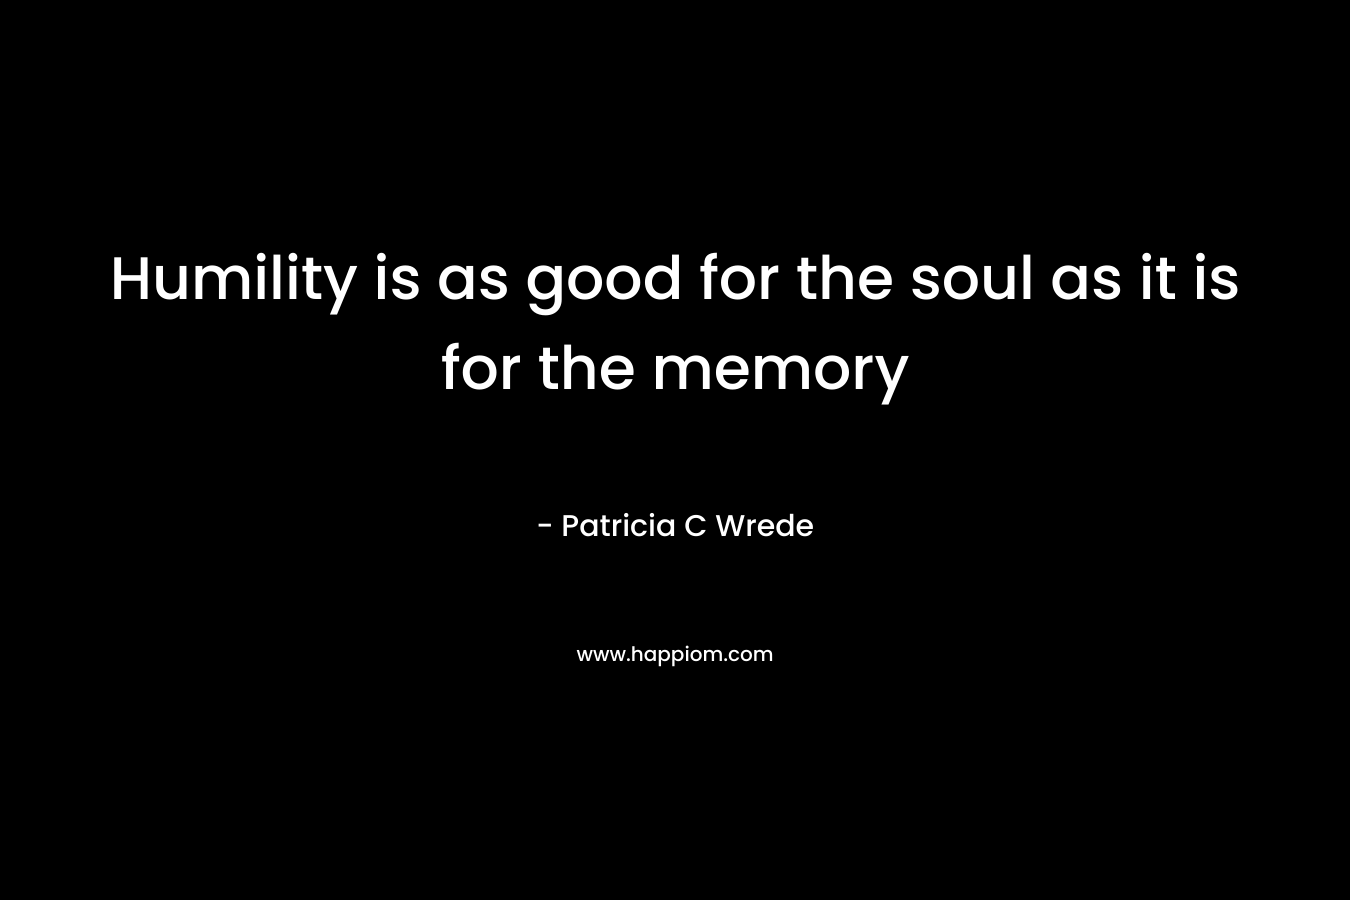 Humility is as good for the soul as it is for the memory – Patricia C Wrede